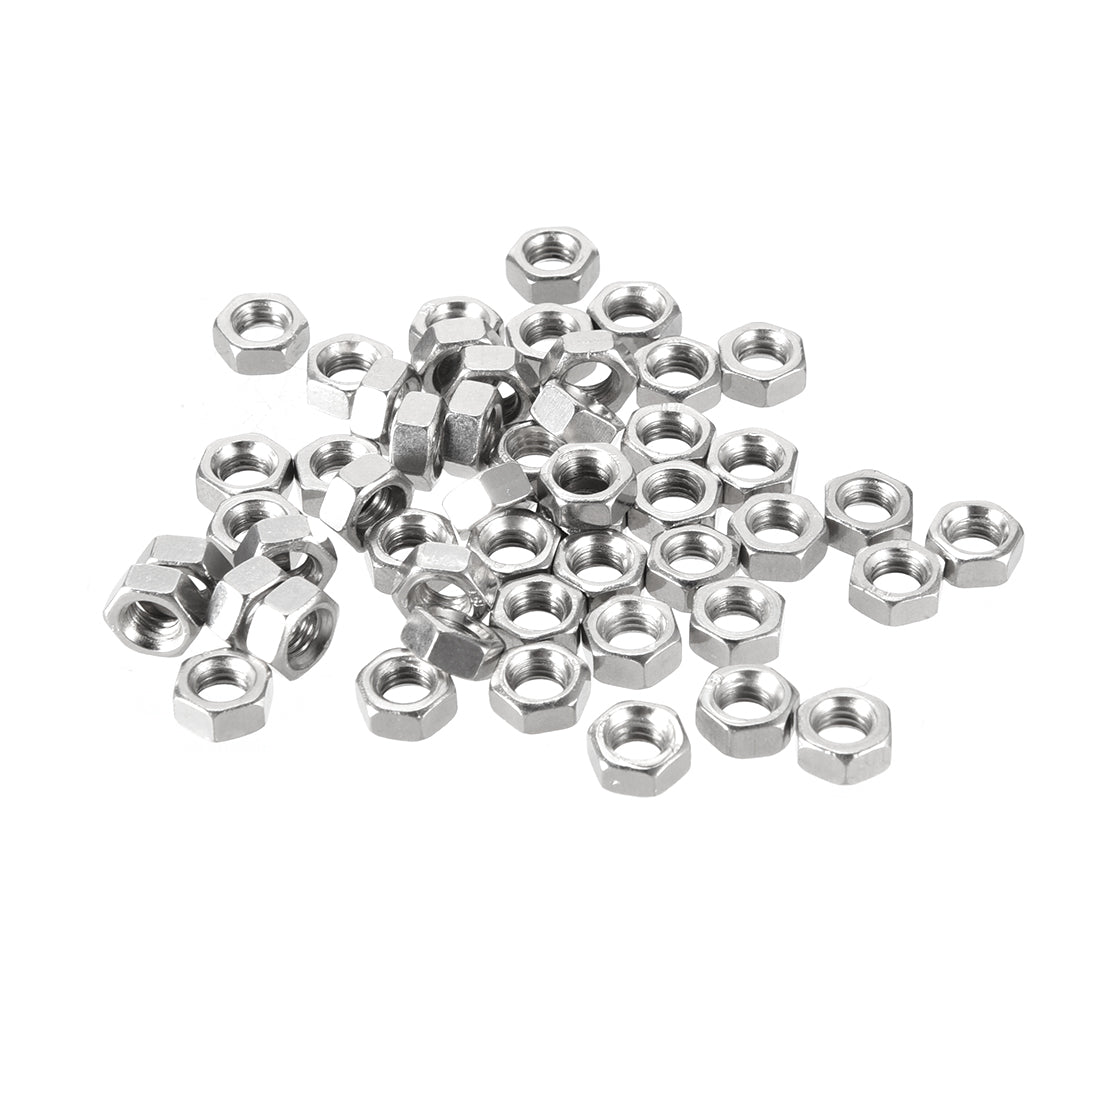 uxcell Uxcell M5 Nickel Plating Metric Carbon Steel Hexagon Hex Nut Silver Tone 50pcs